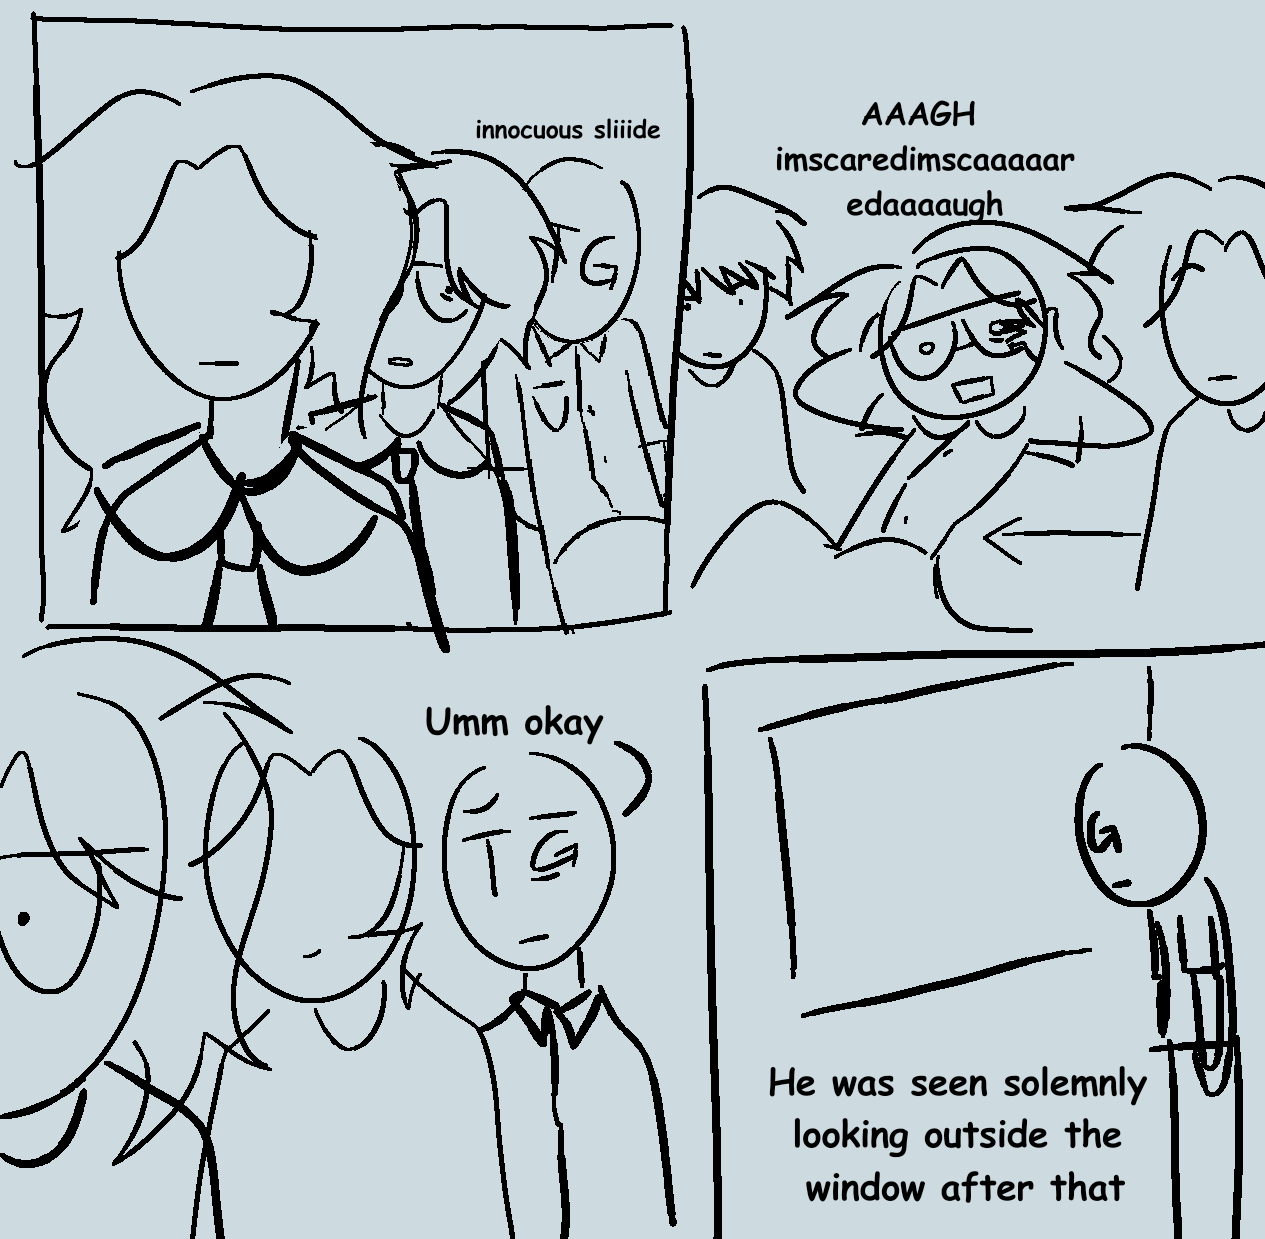 blue 4 panel comic depicting me rejecting some guy